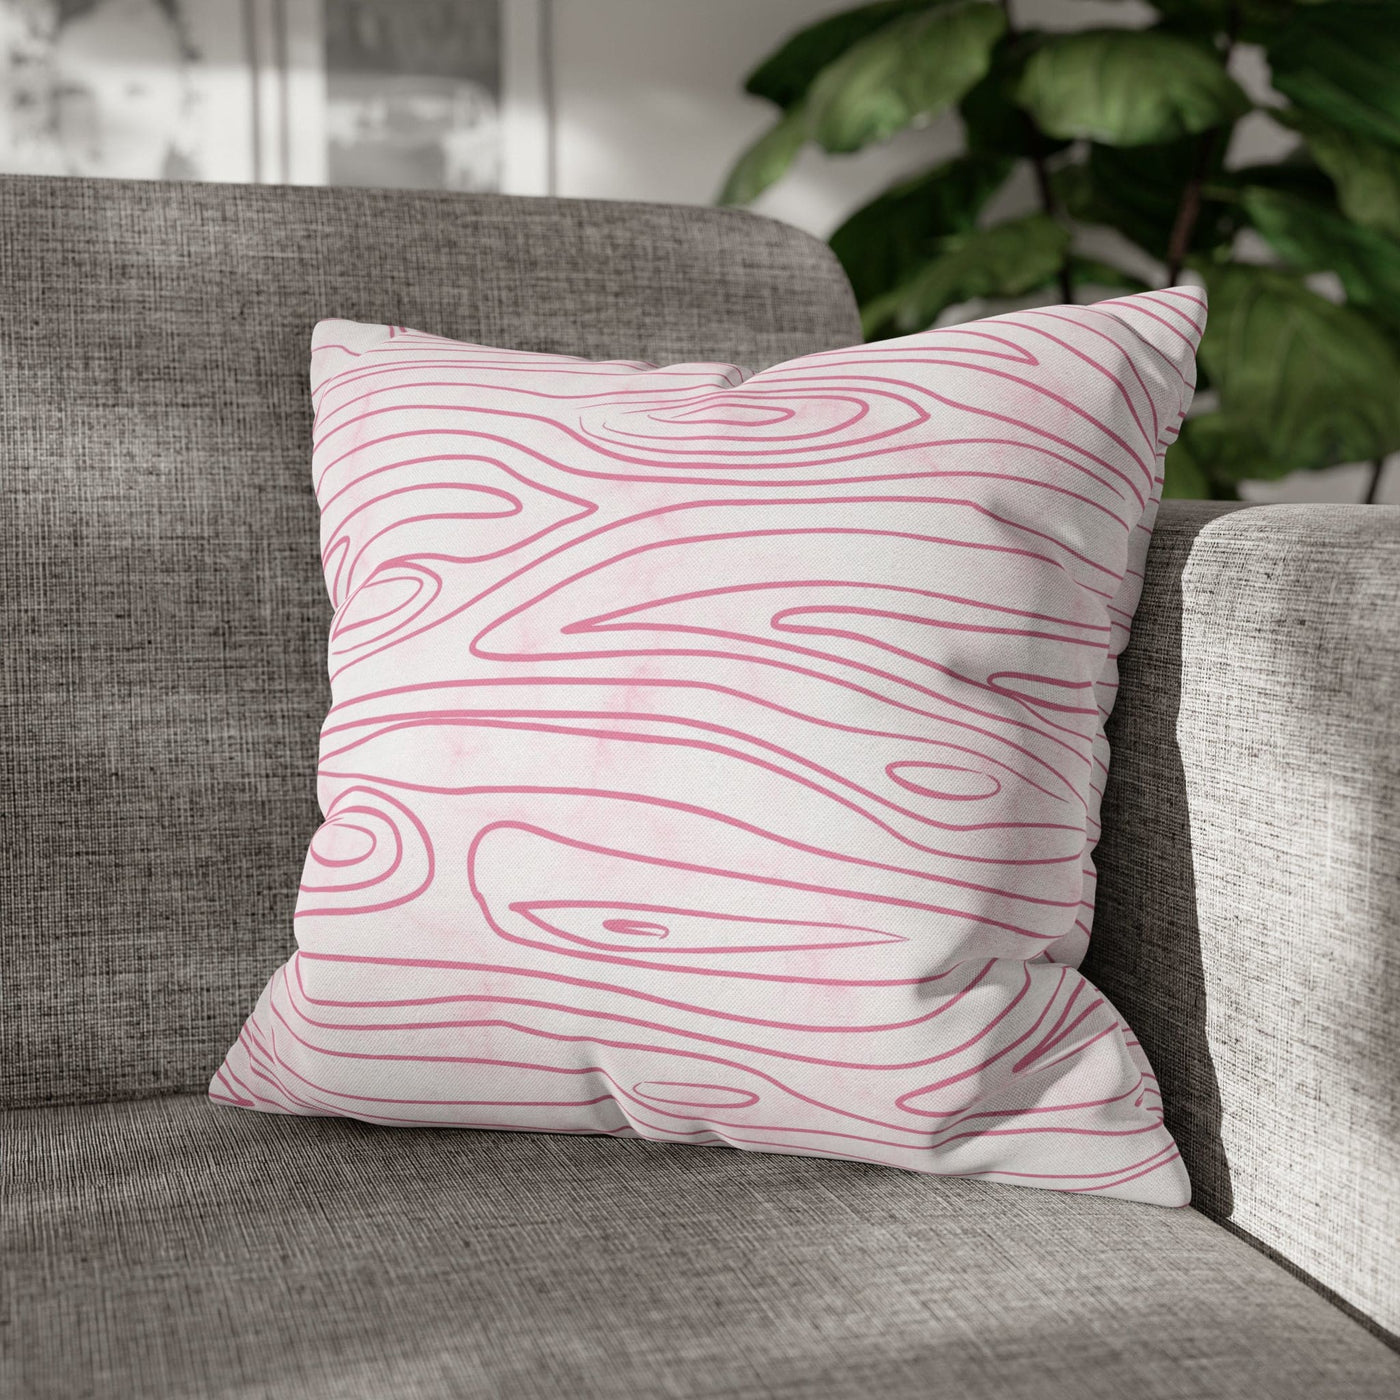 Decorative Throw Pillow Covers With Zipper - Set Of 2 Pink Line Art Sketch